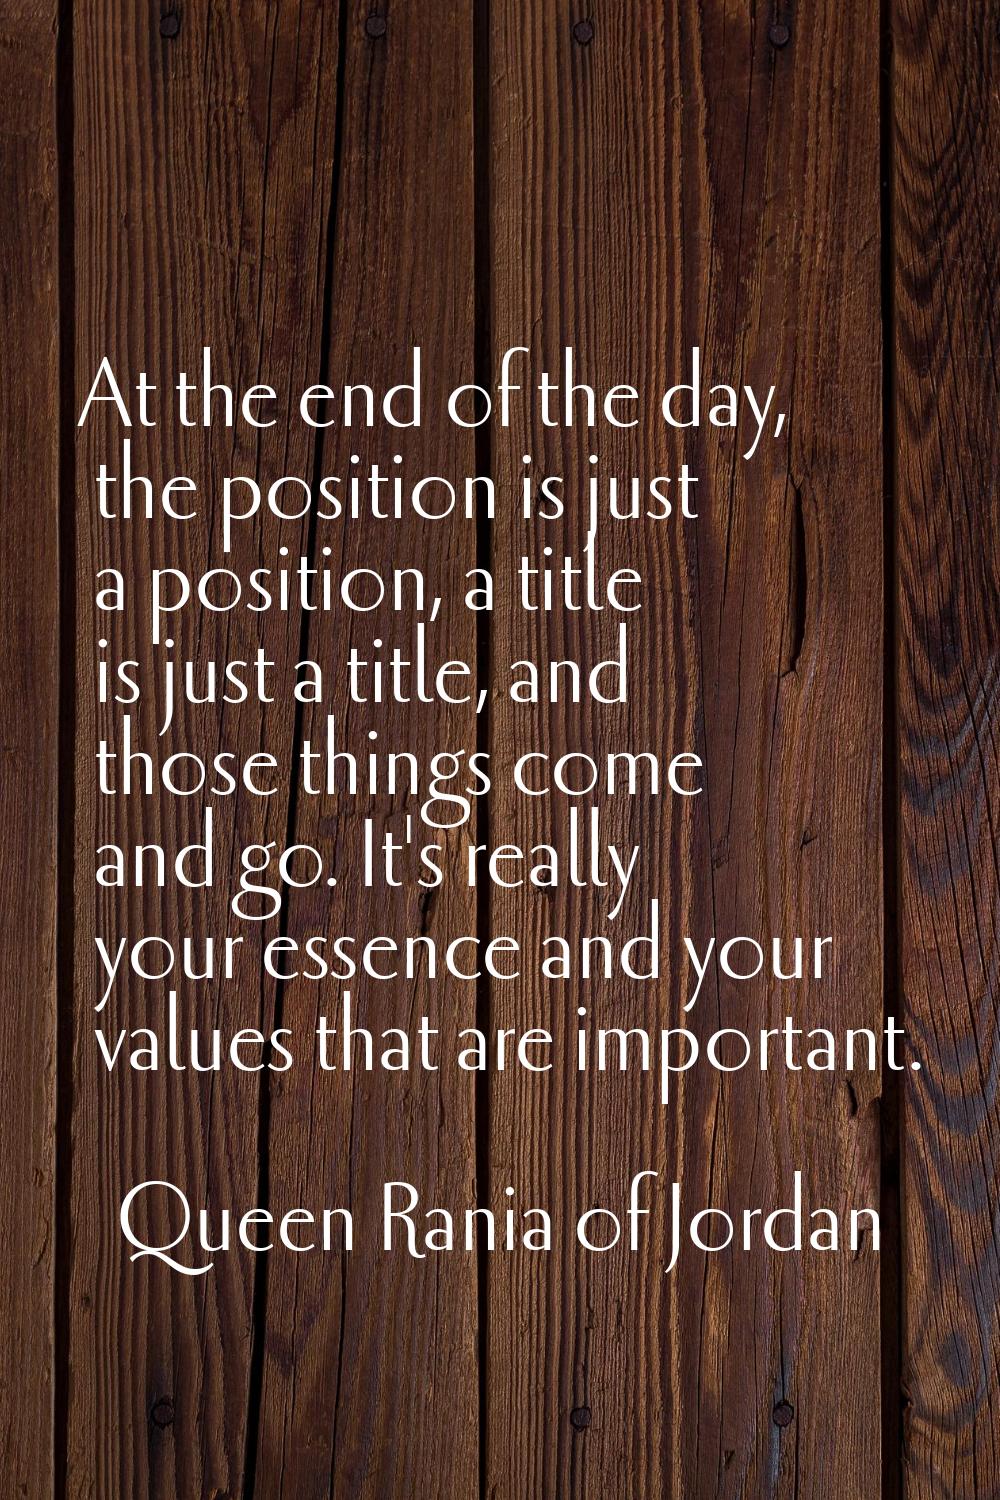 At the end of the day, the position is just a position, a title is just a title, and those things c